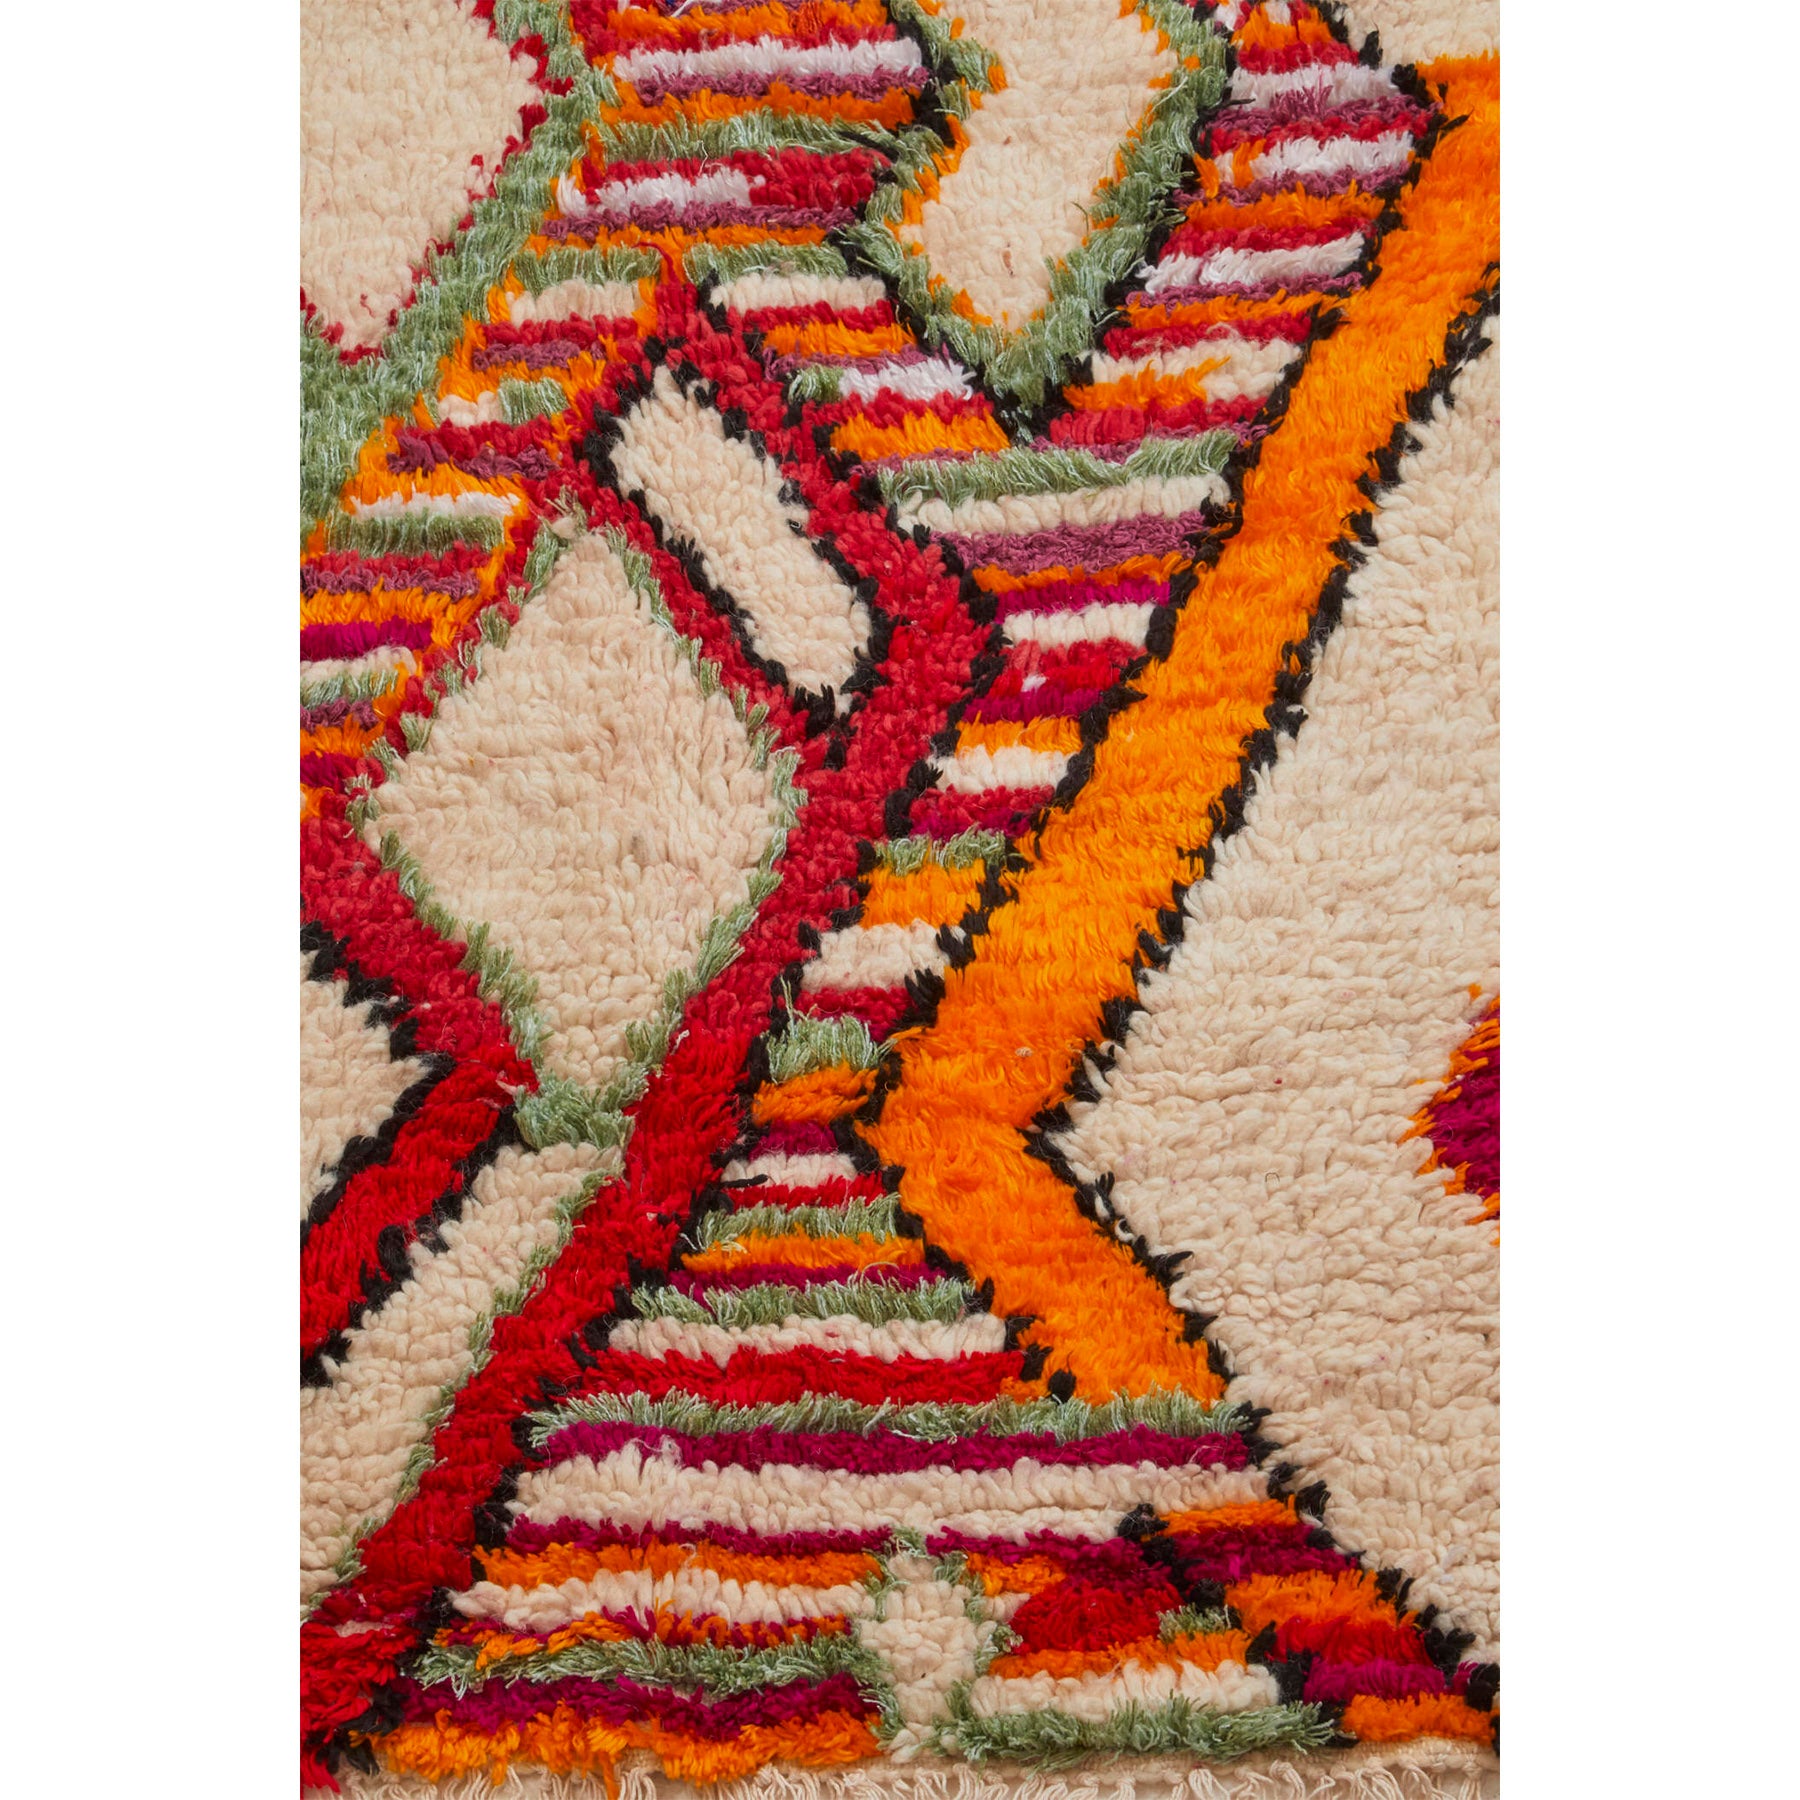 Boho chic Moroccan throw rug with colorful details - Kantara | Moroccan Rugs